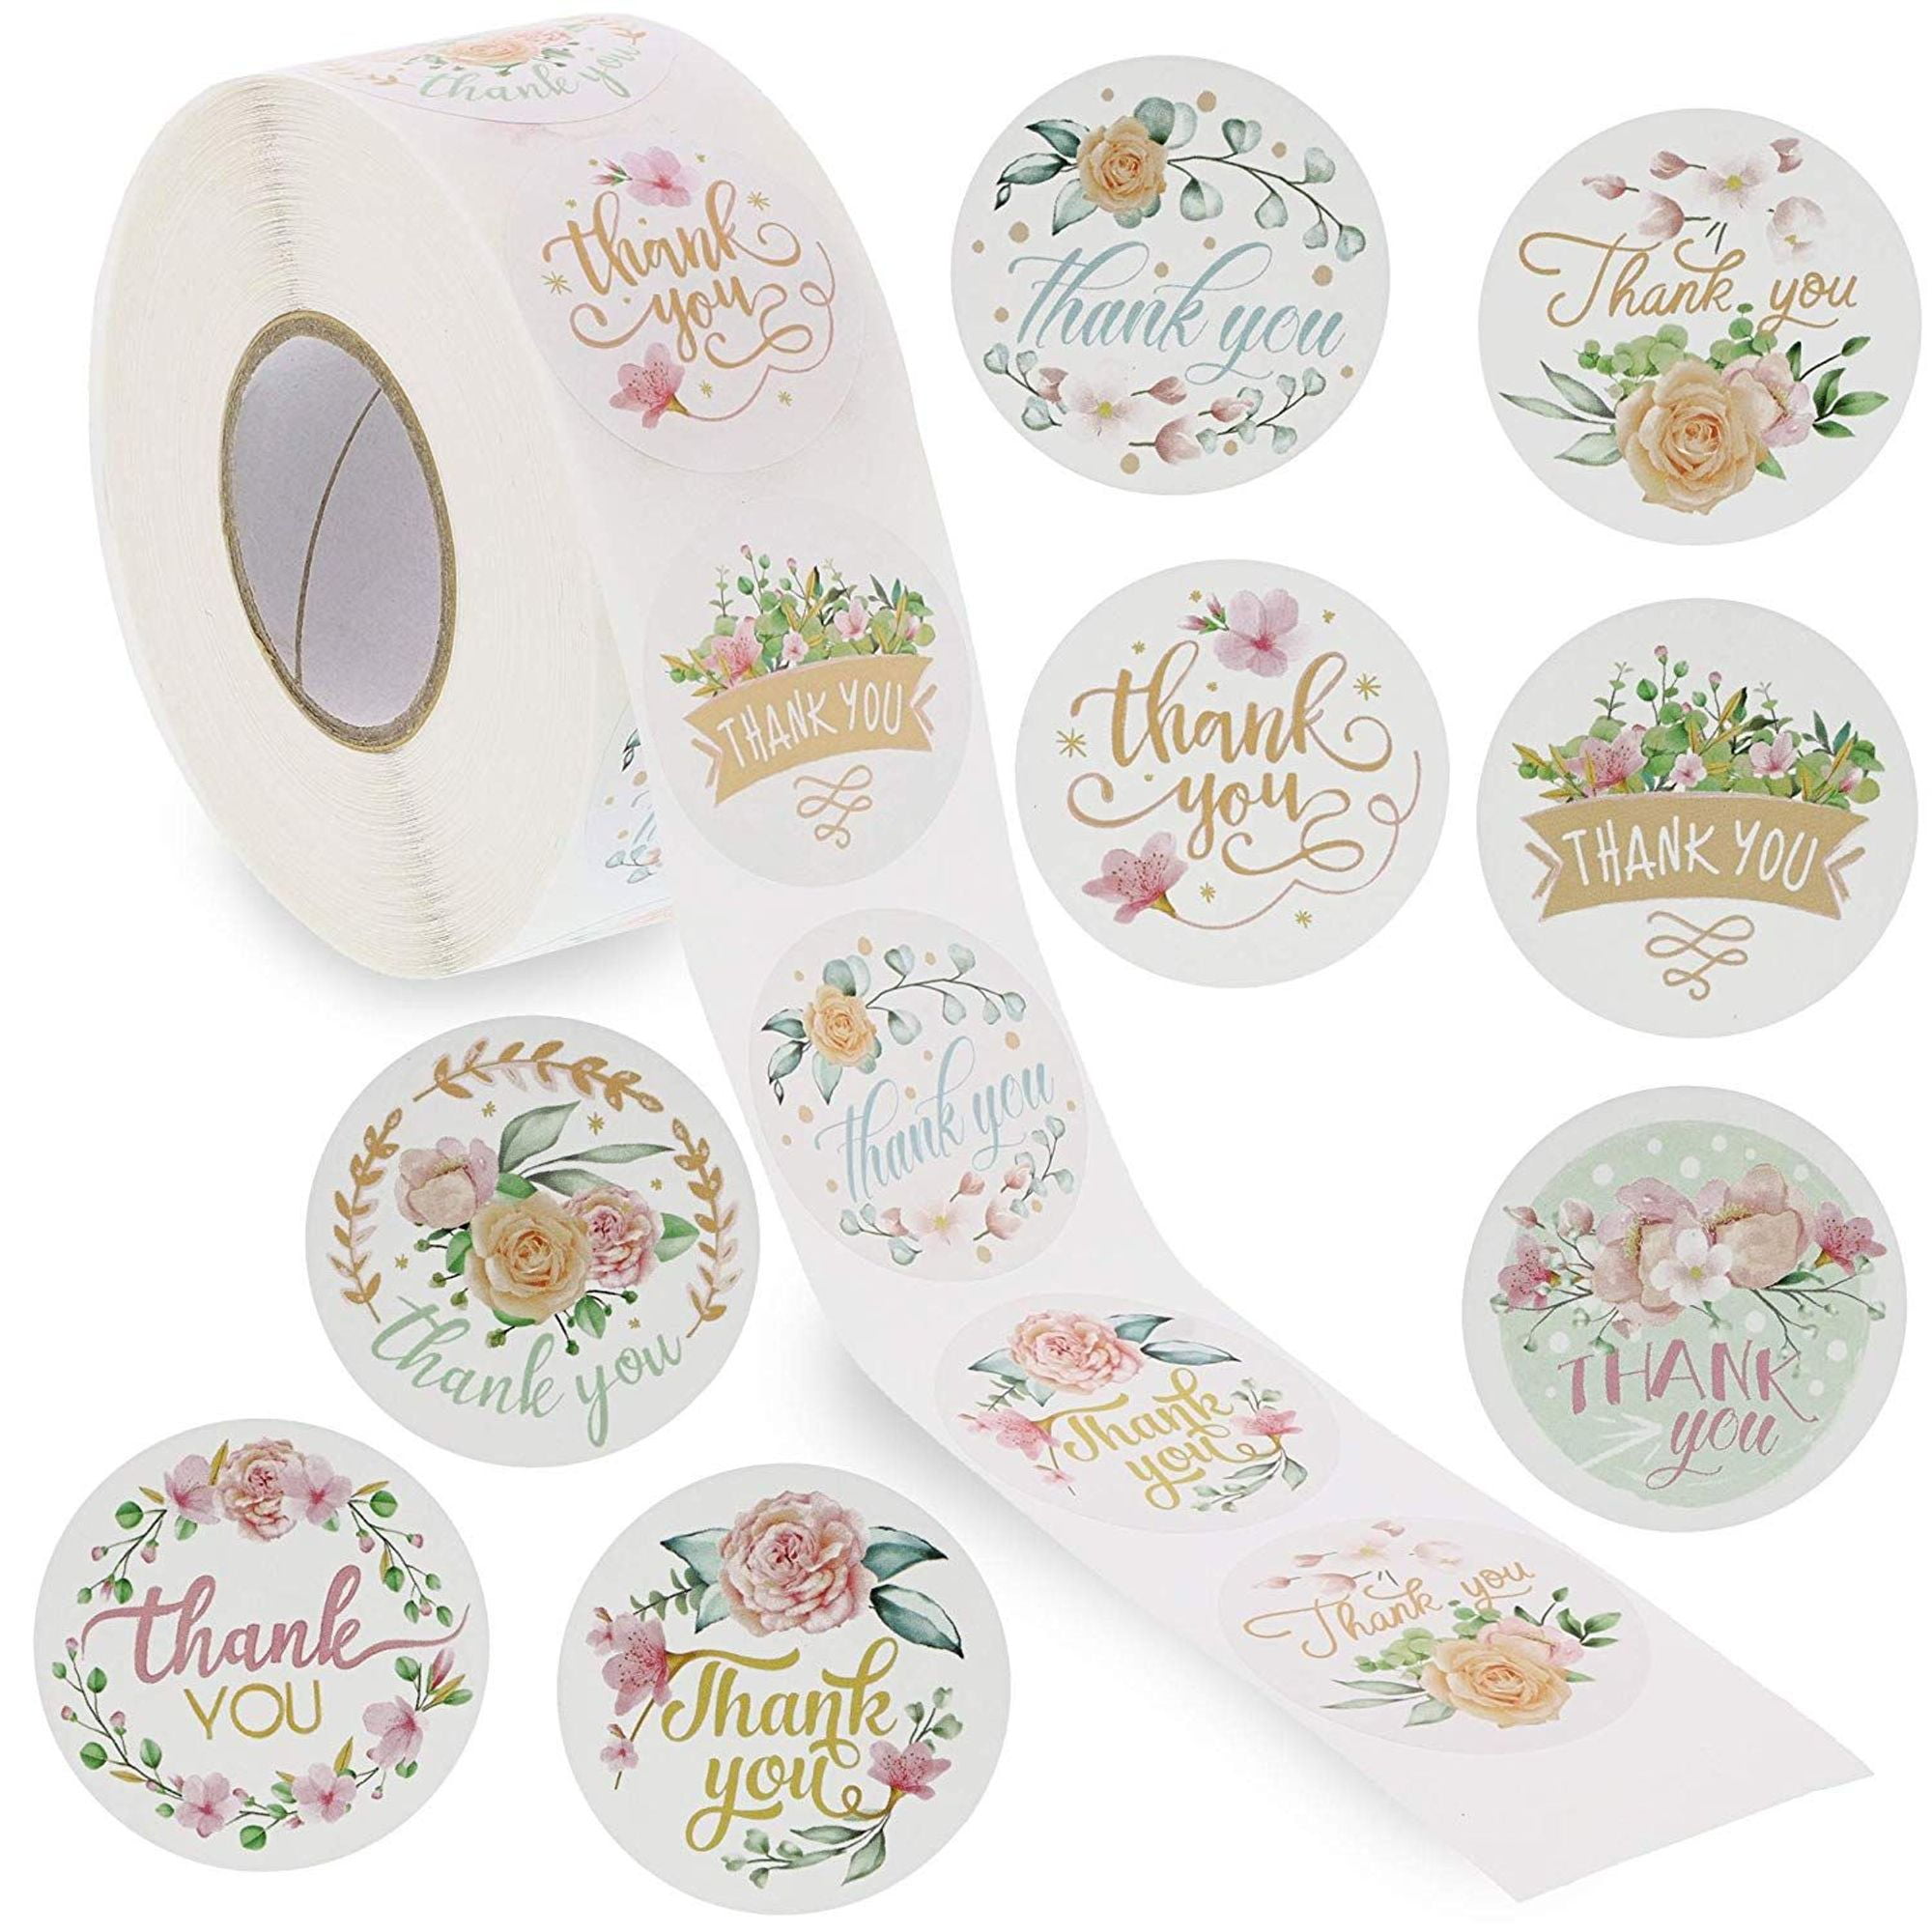 1000 Stickers/Roll Wedding Party,Envelope,Present Adhesive Labels 1.5 inch with Flower Decorative Sealing Stickers for Christmas Gifts,Cards 2 Designs Flower Shape Thank You Stickers Roll